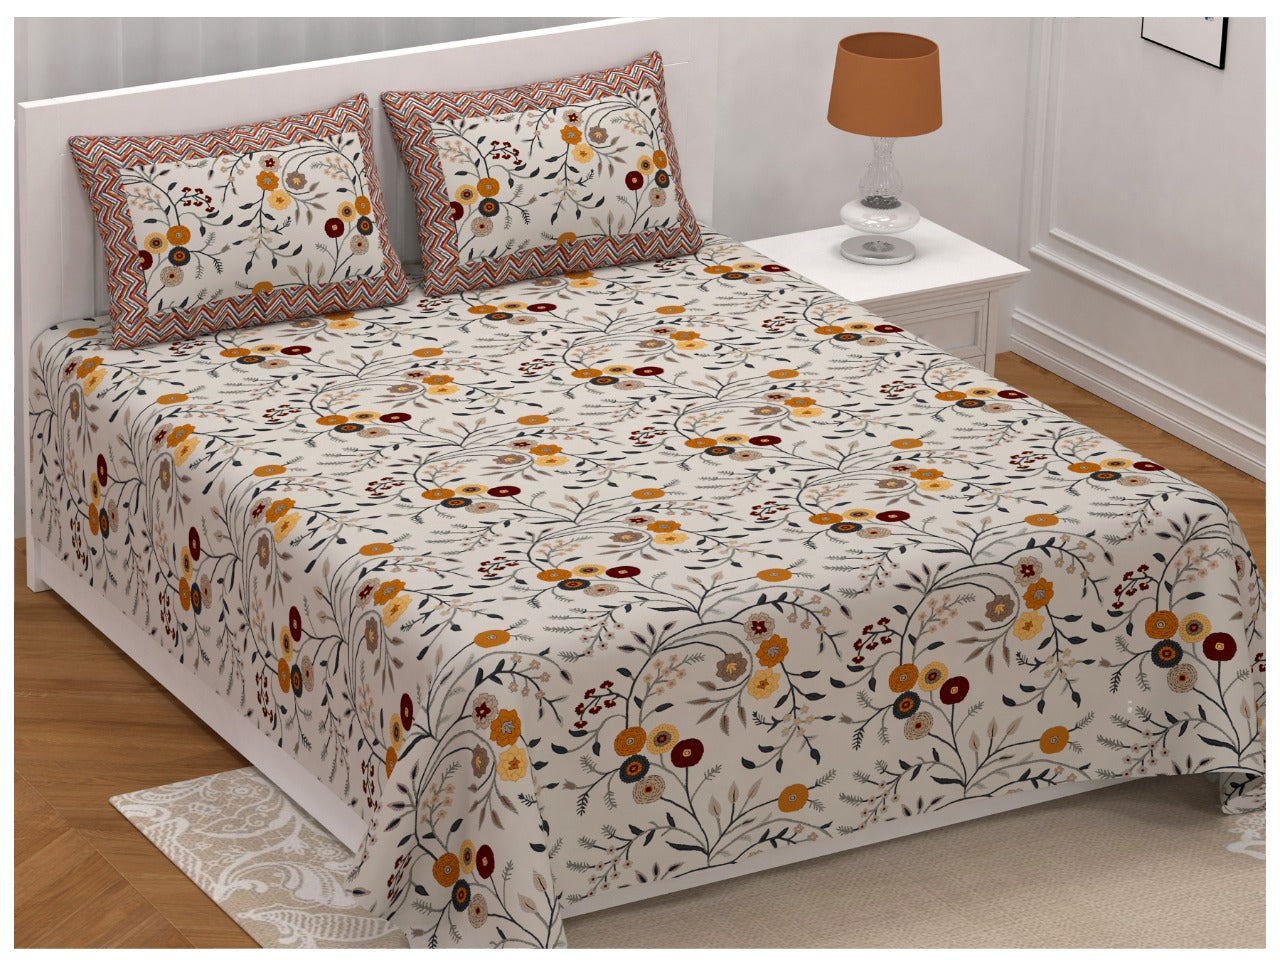 100% Pure Cotton King Size Double Bedsheet With 2 Pillow Covers ( 100 X 108 Inches ) - JBNBK51